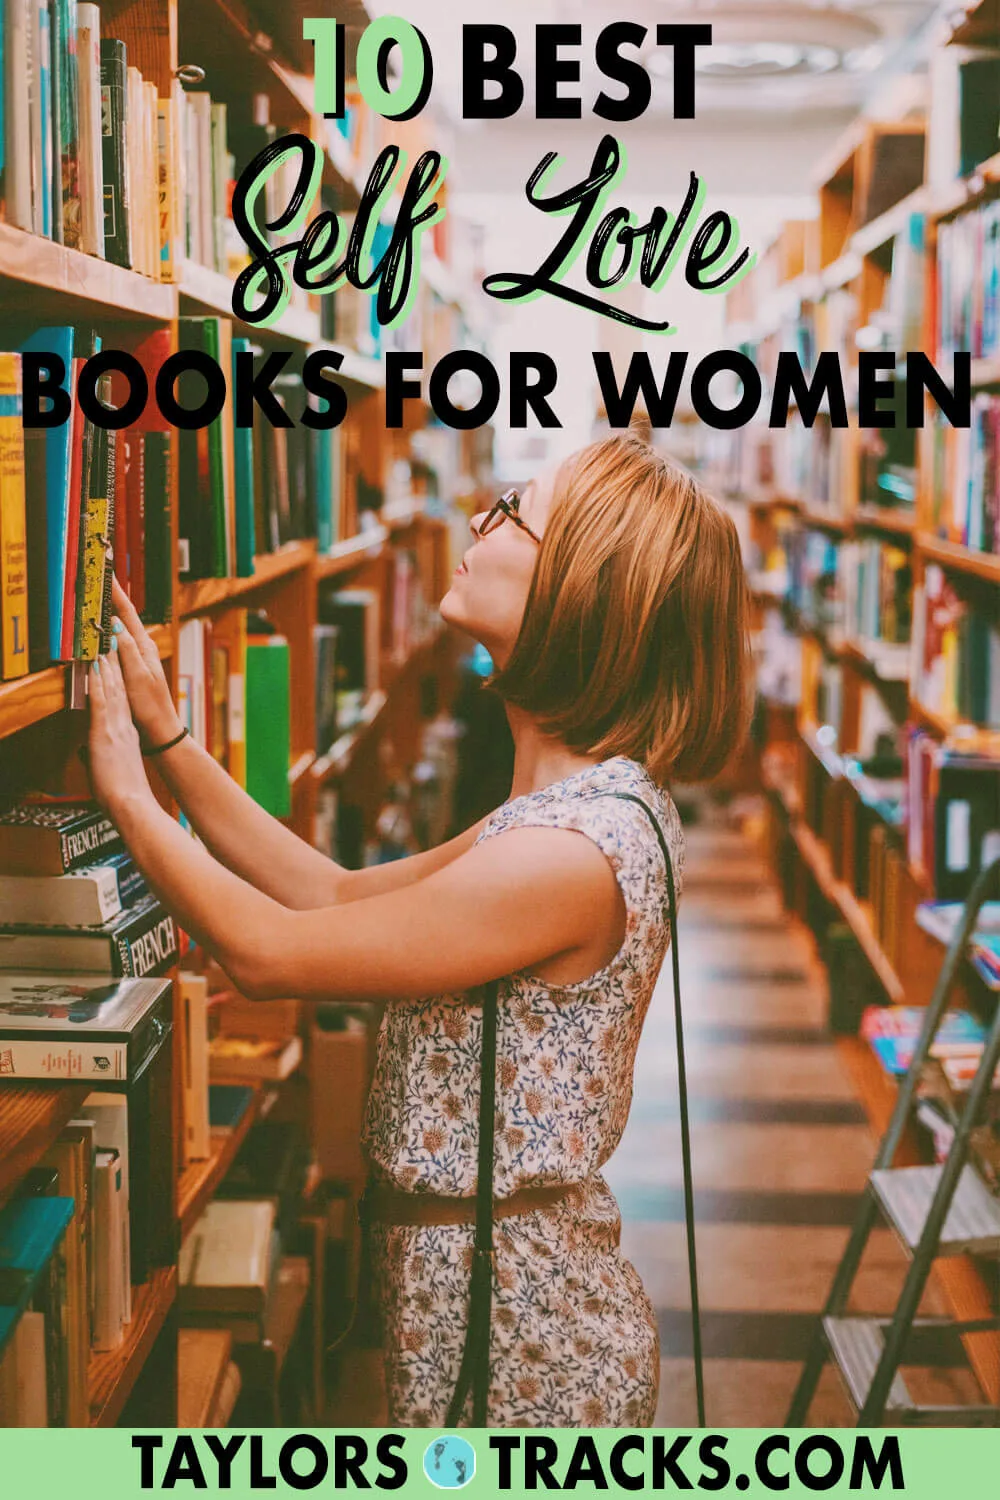 These books for self love are written by self love experts from around the globe who teach their unique ways of learning how to love yourself unconditionally. Click for find the top self love books for women!